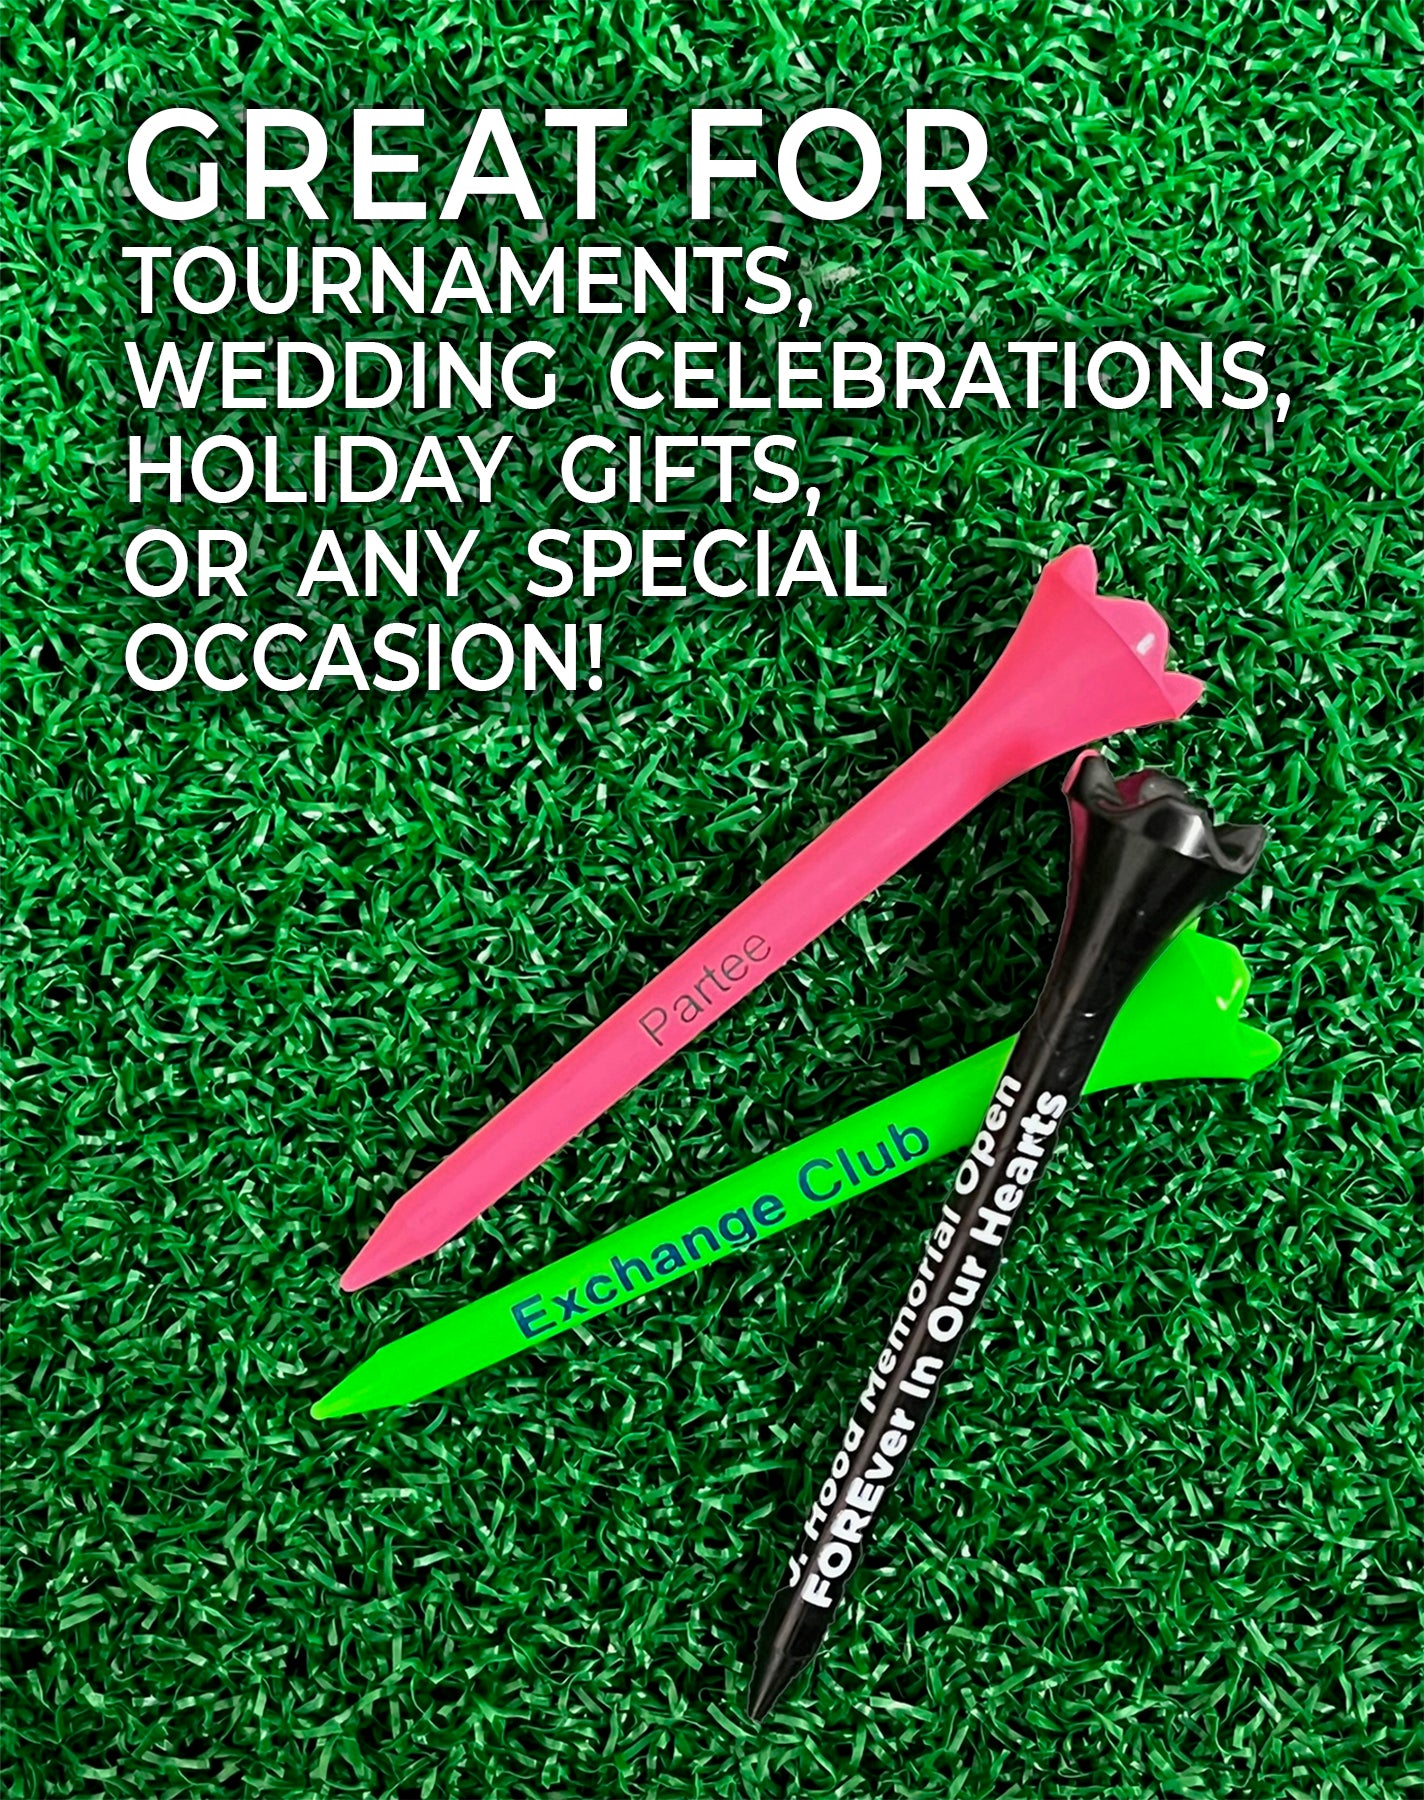 Personalized Pride Performance® Combo Packs - 5 Tees, 2 Ball Markers, and 1 Divot Repair Tool